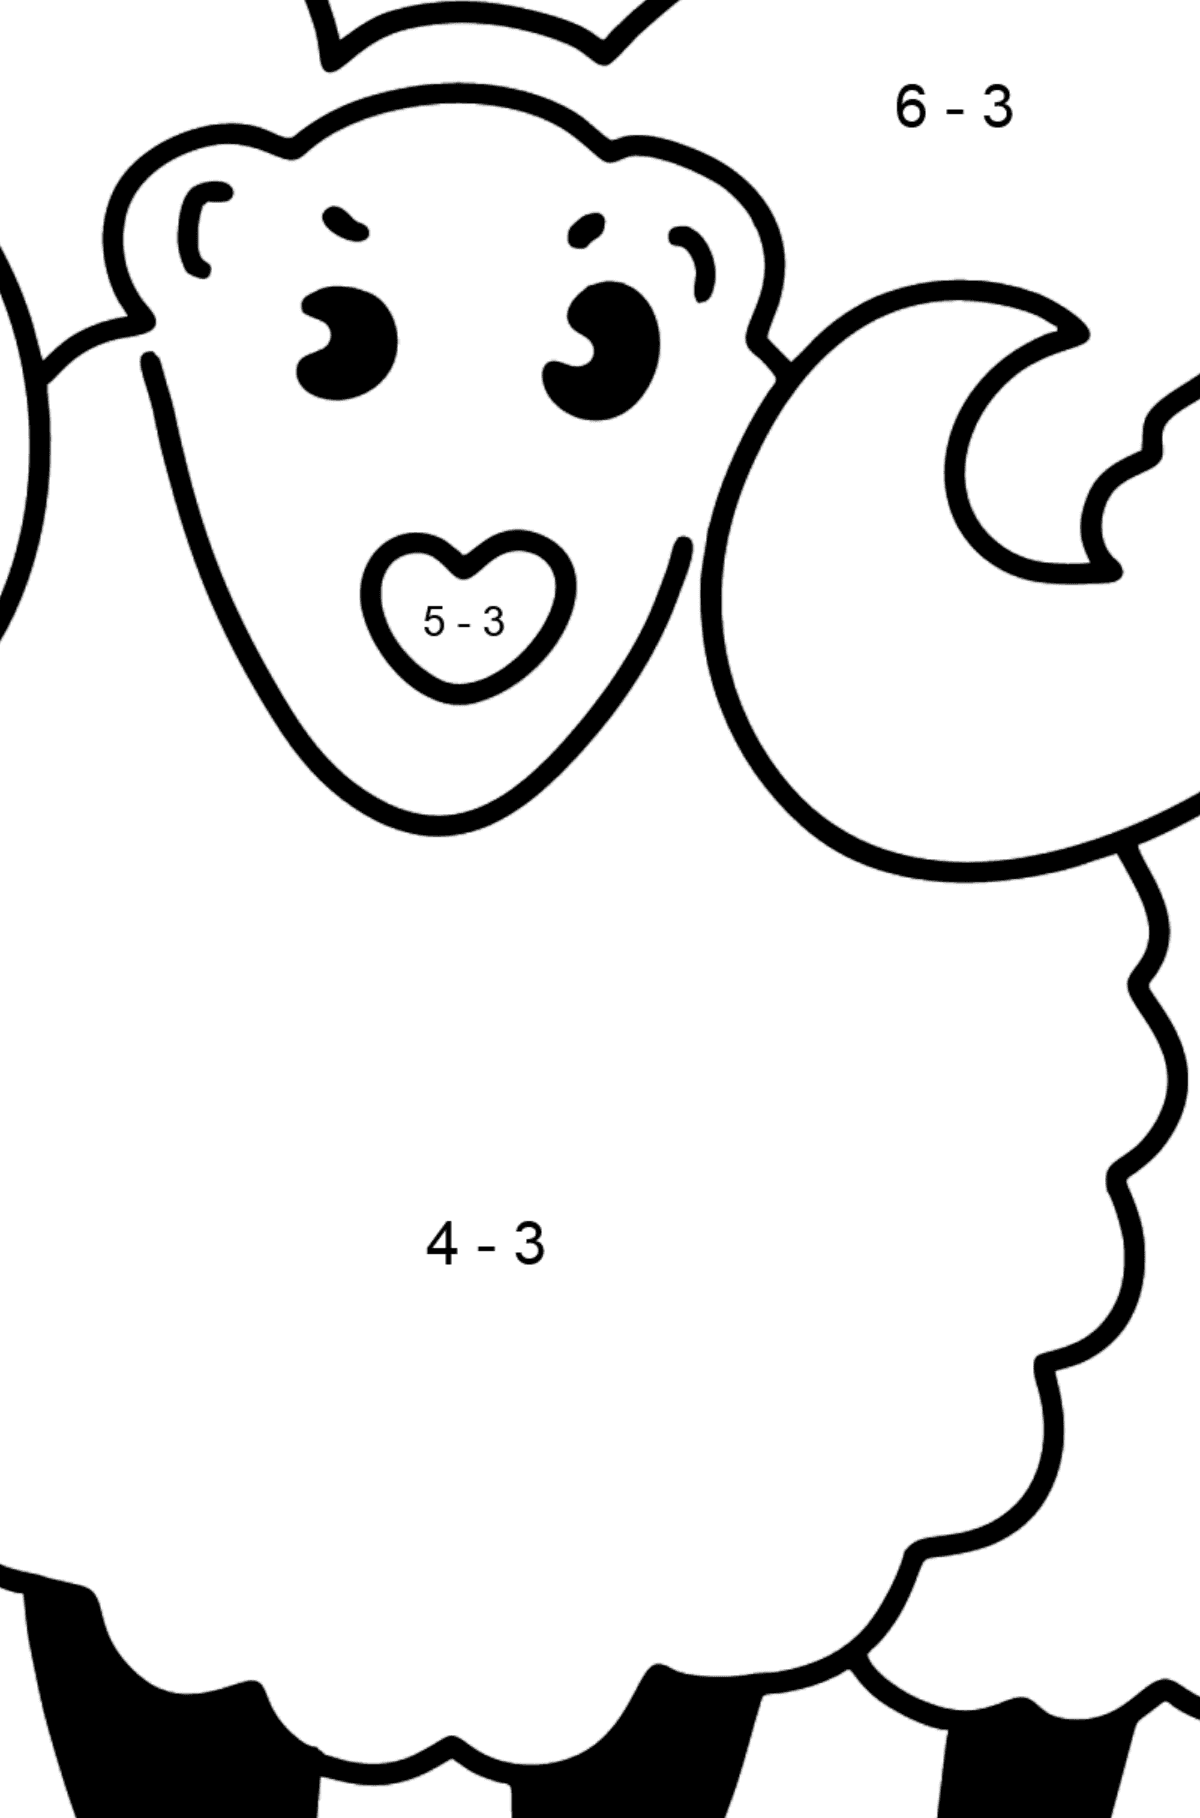 Home Lamb coloring page - Math Coloring - Subtraction for Kids